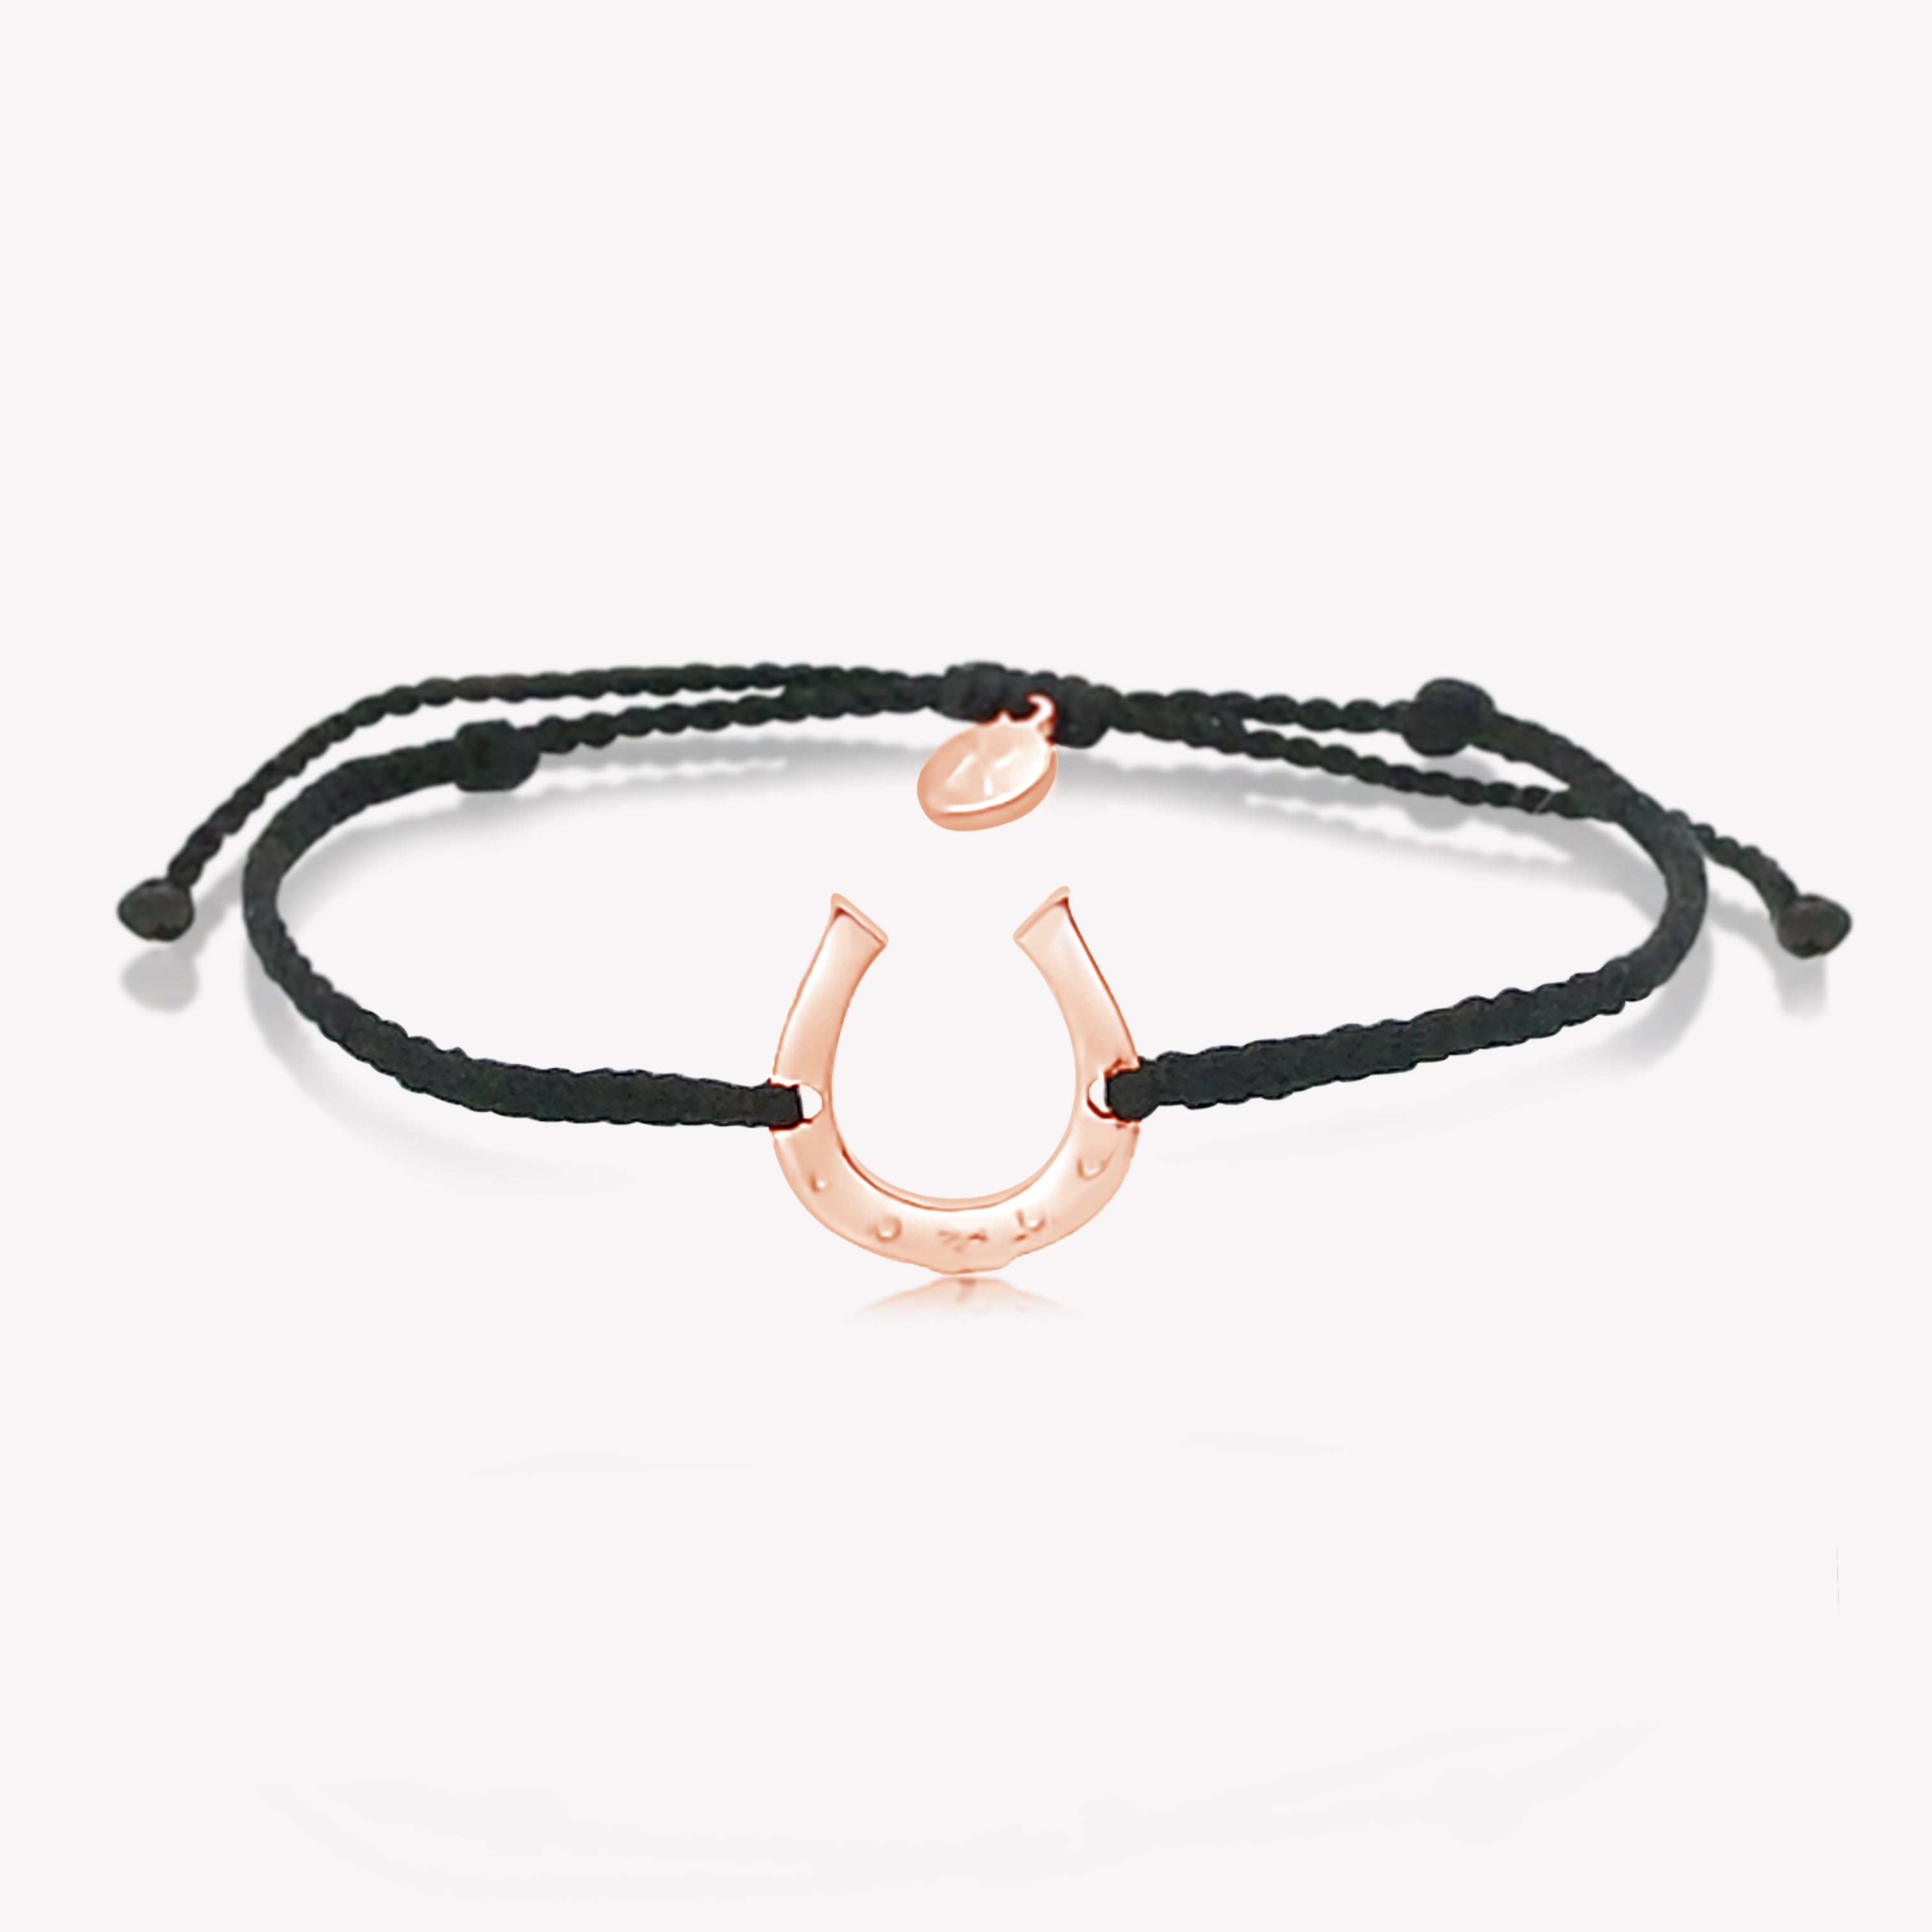 Close up of limited edition black cord friendship bracelet featuring a horseshoe pendant in rose gold from the Made4Ministry Collection by Rizen Jewelry benefitting Big Oak Ranch.